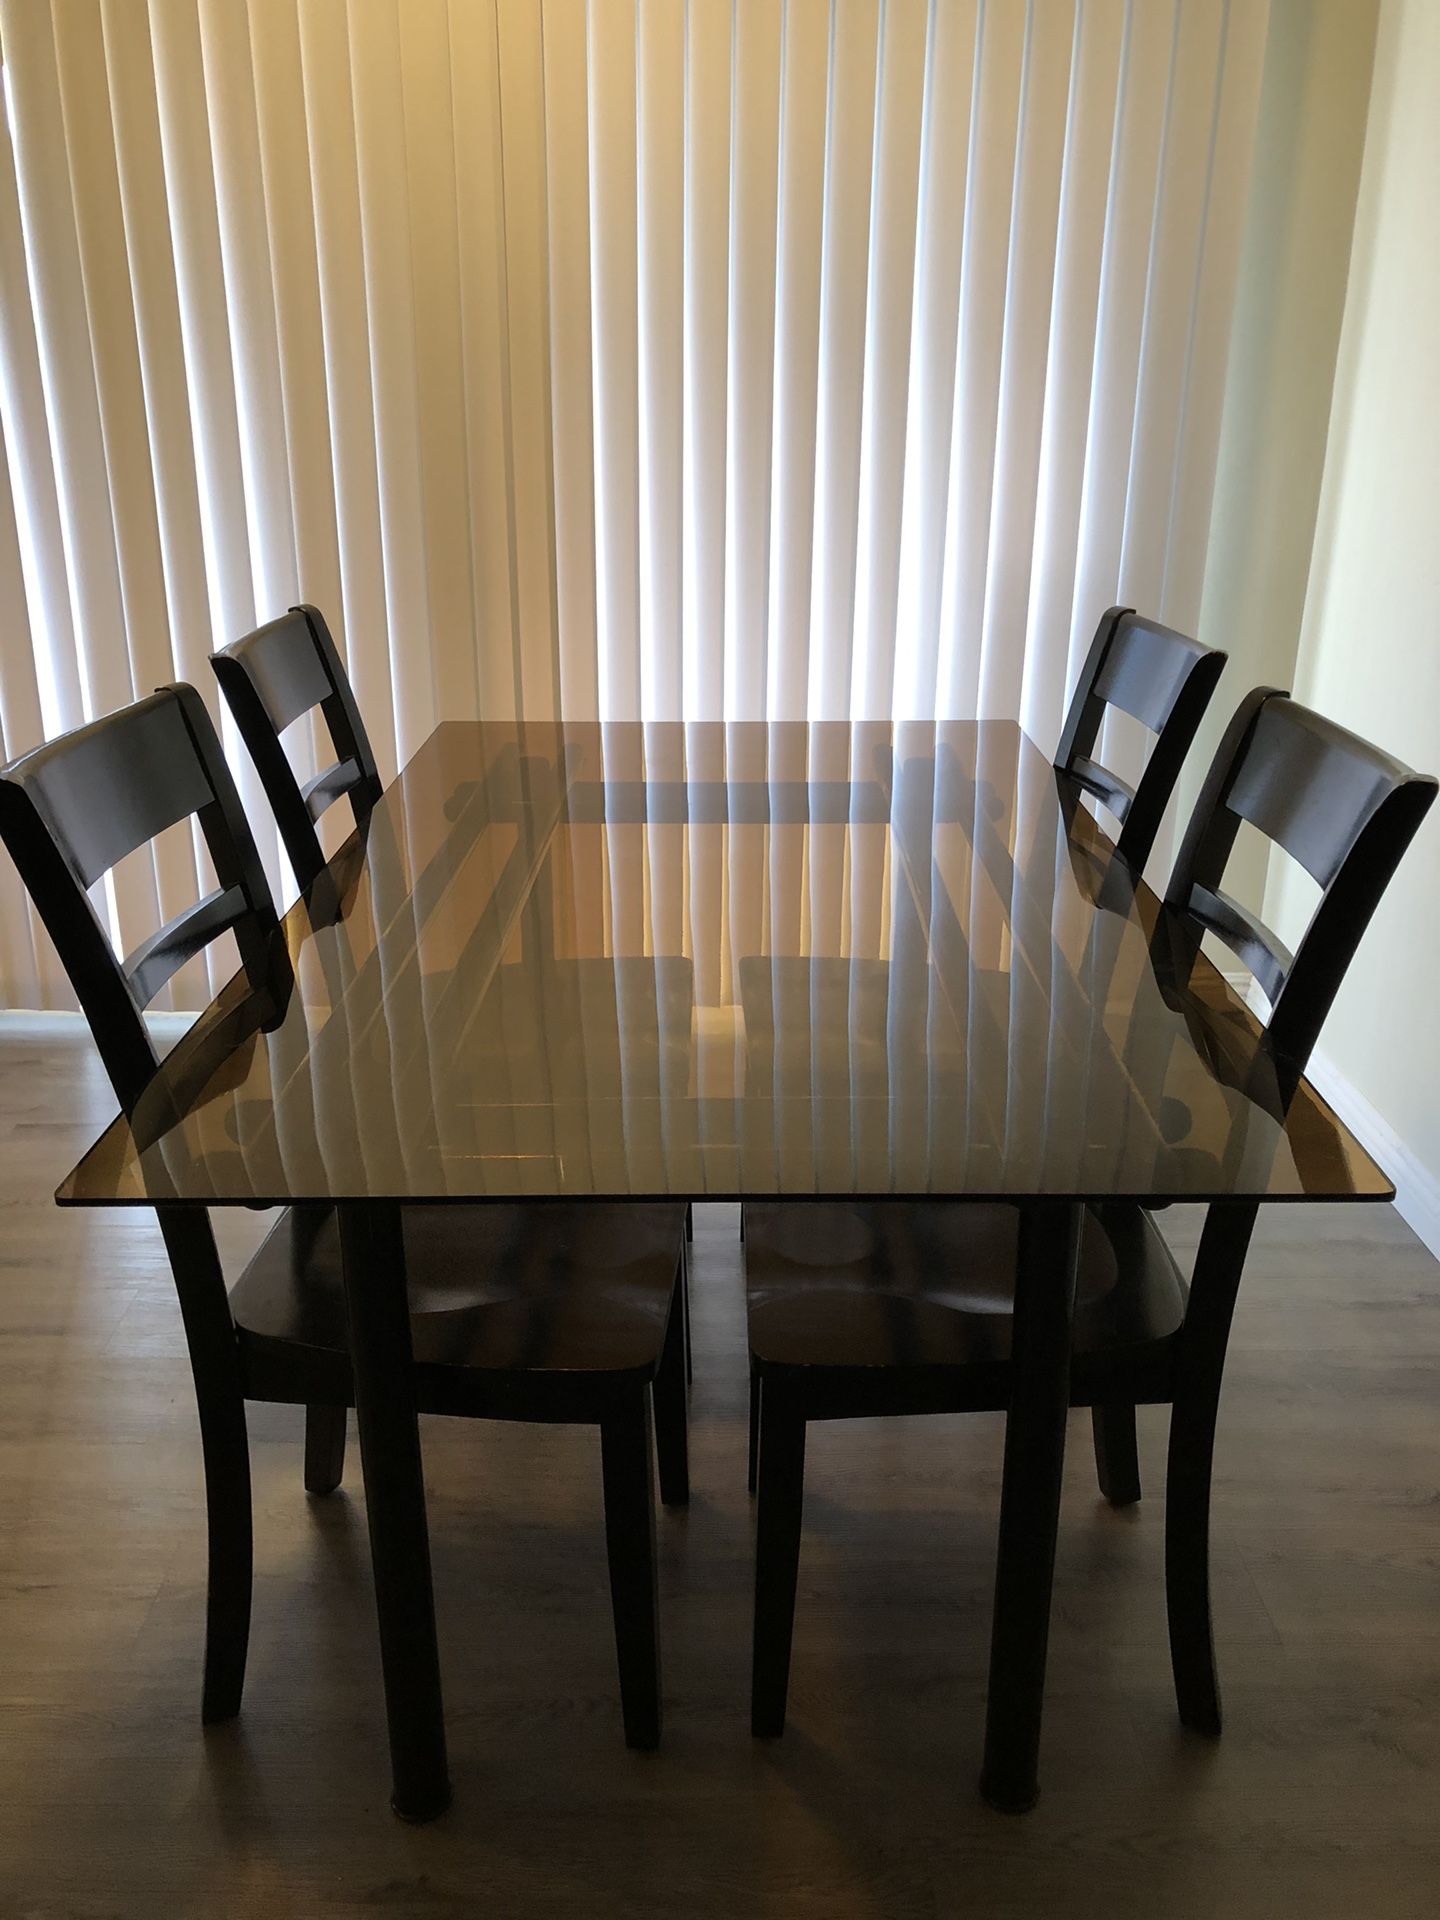 Dining table with all 4 chairs included!